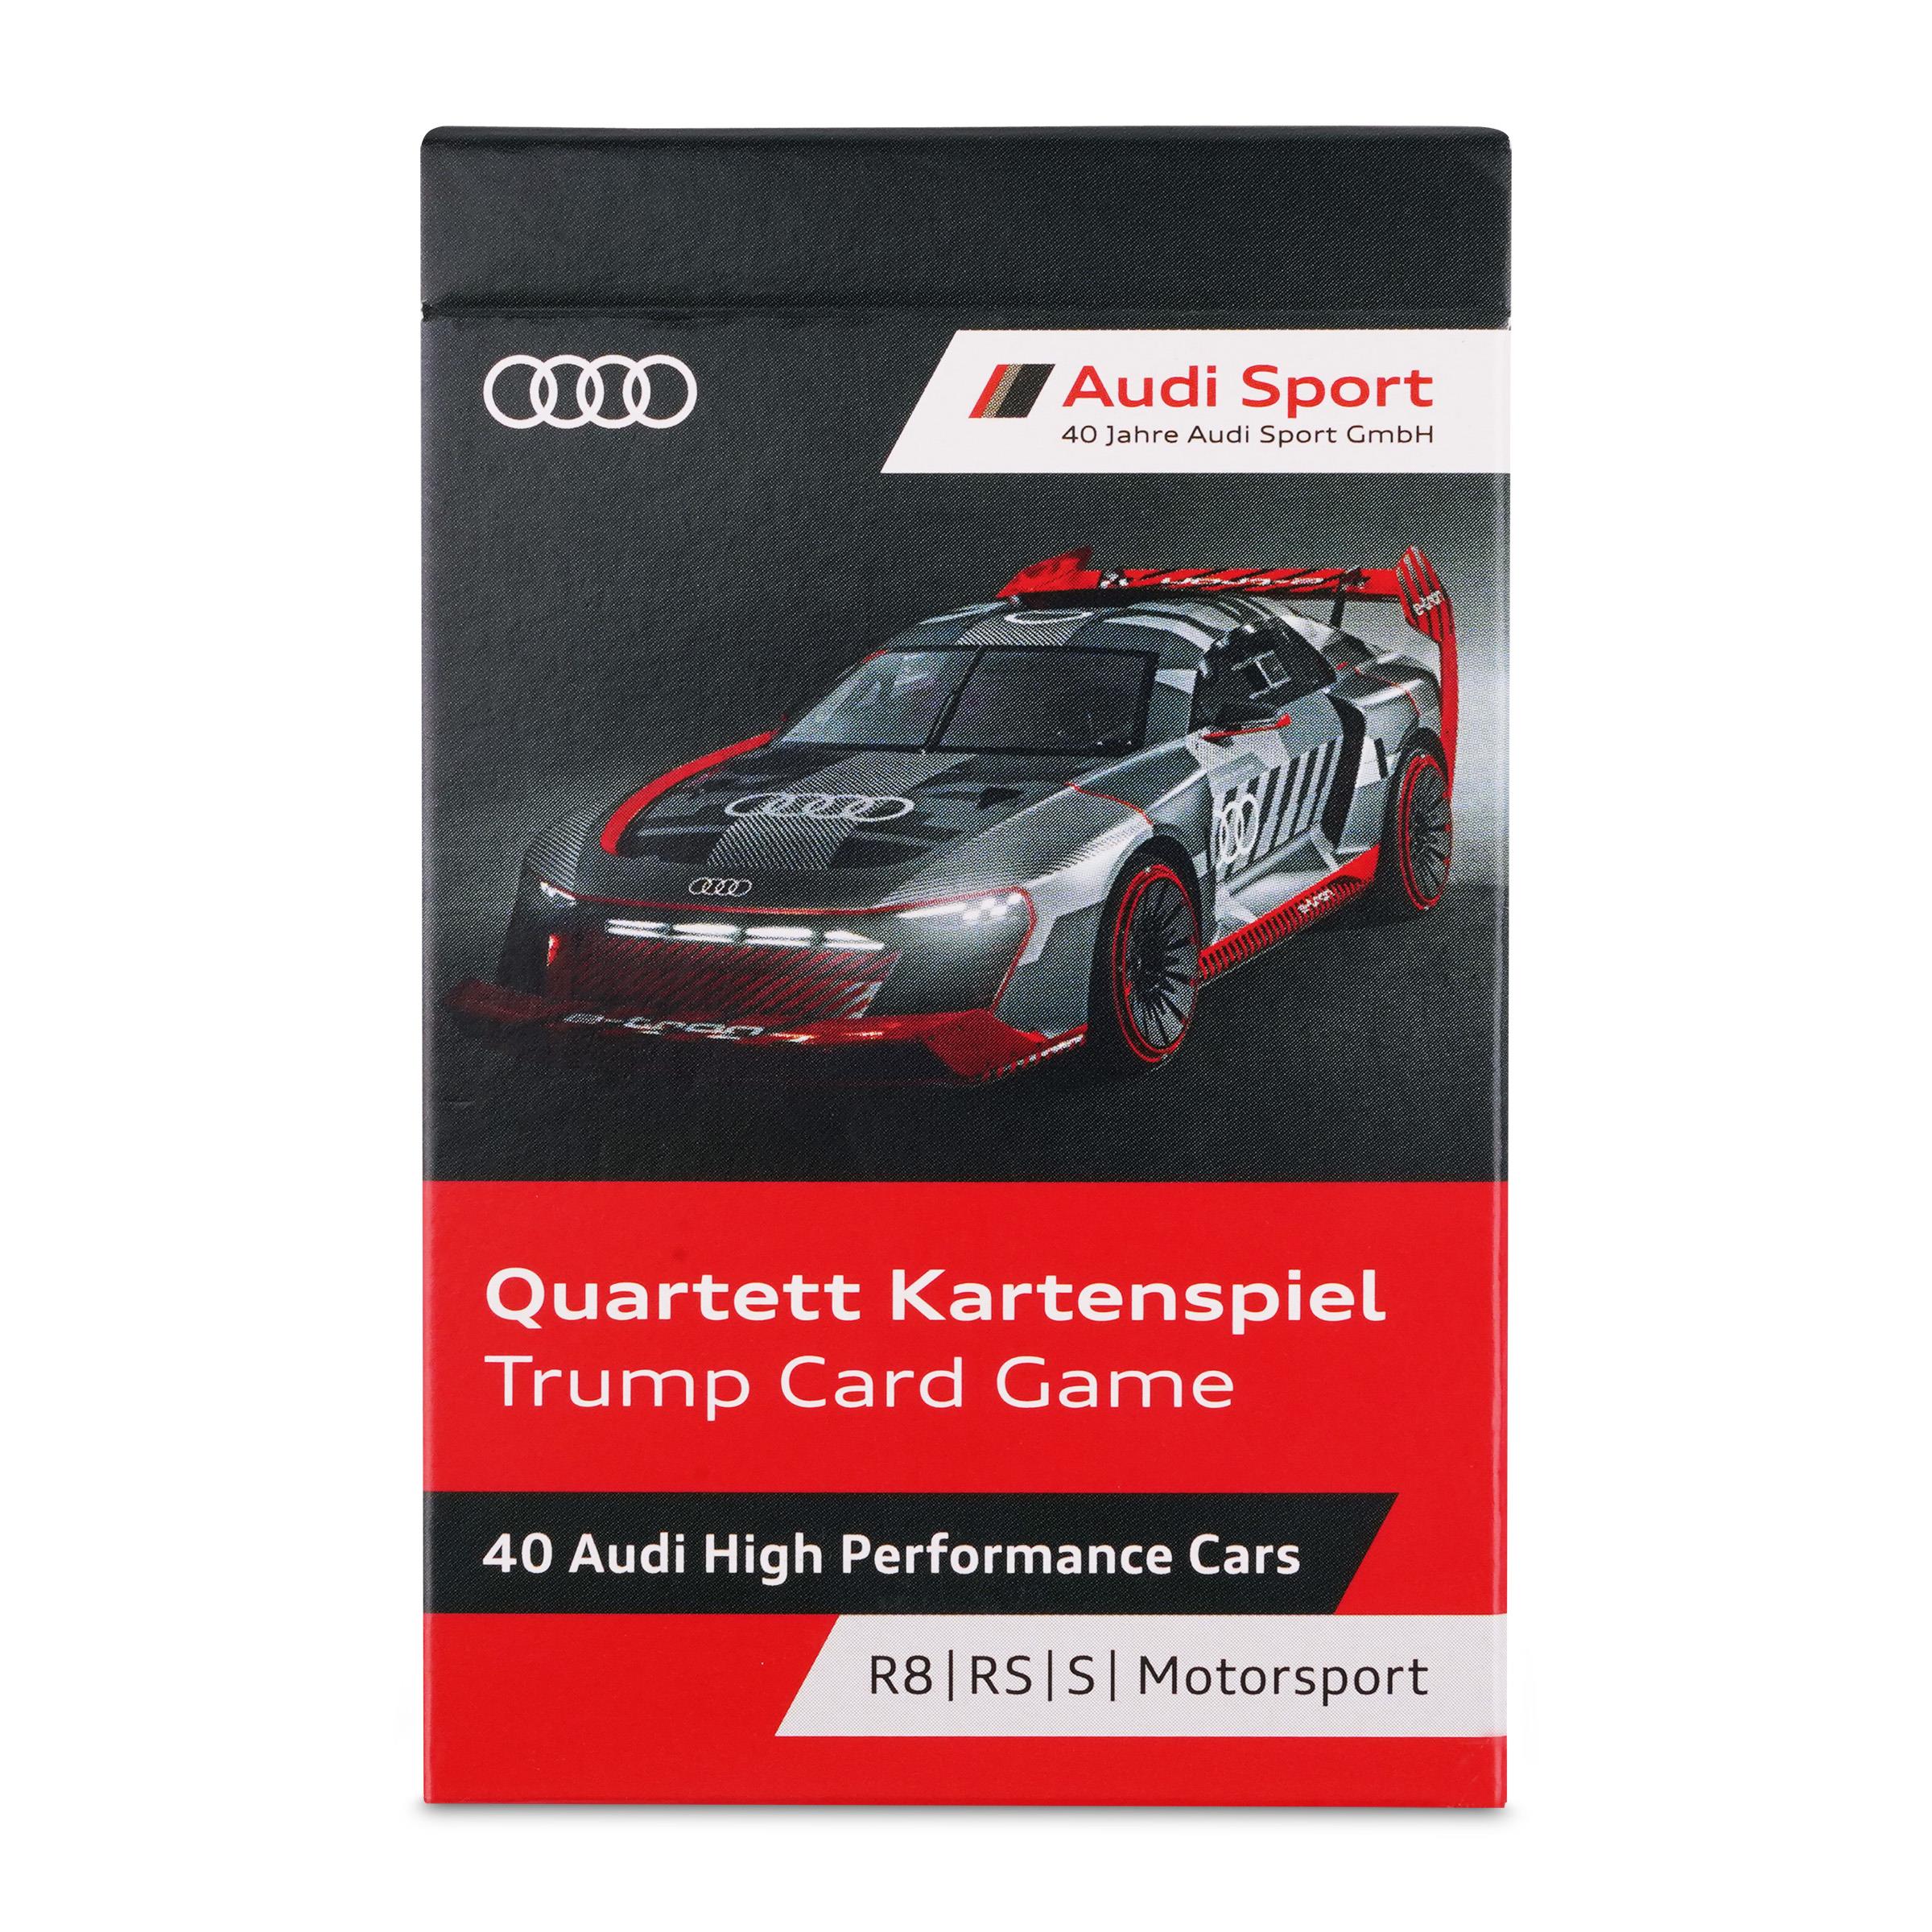 Audi foursome card game 40 Years Audi Sport, Audi Kids, Categories